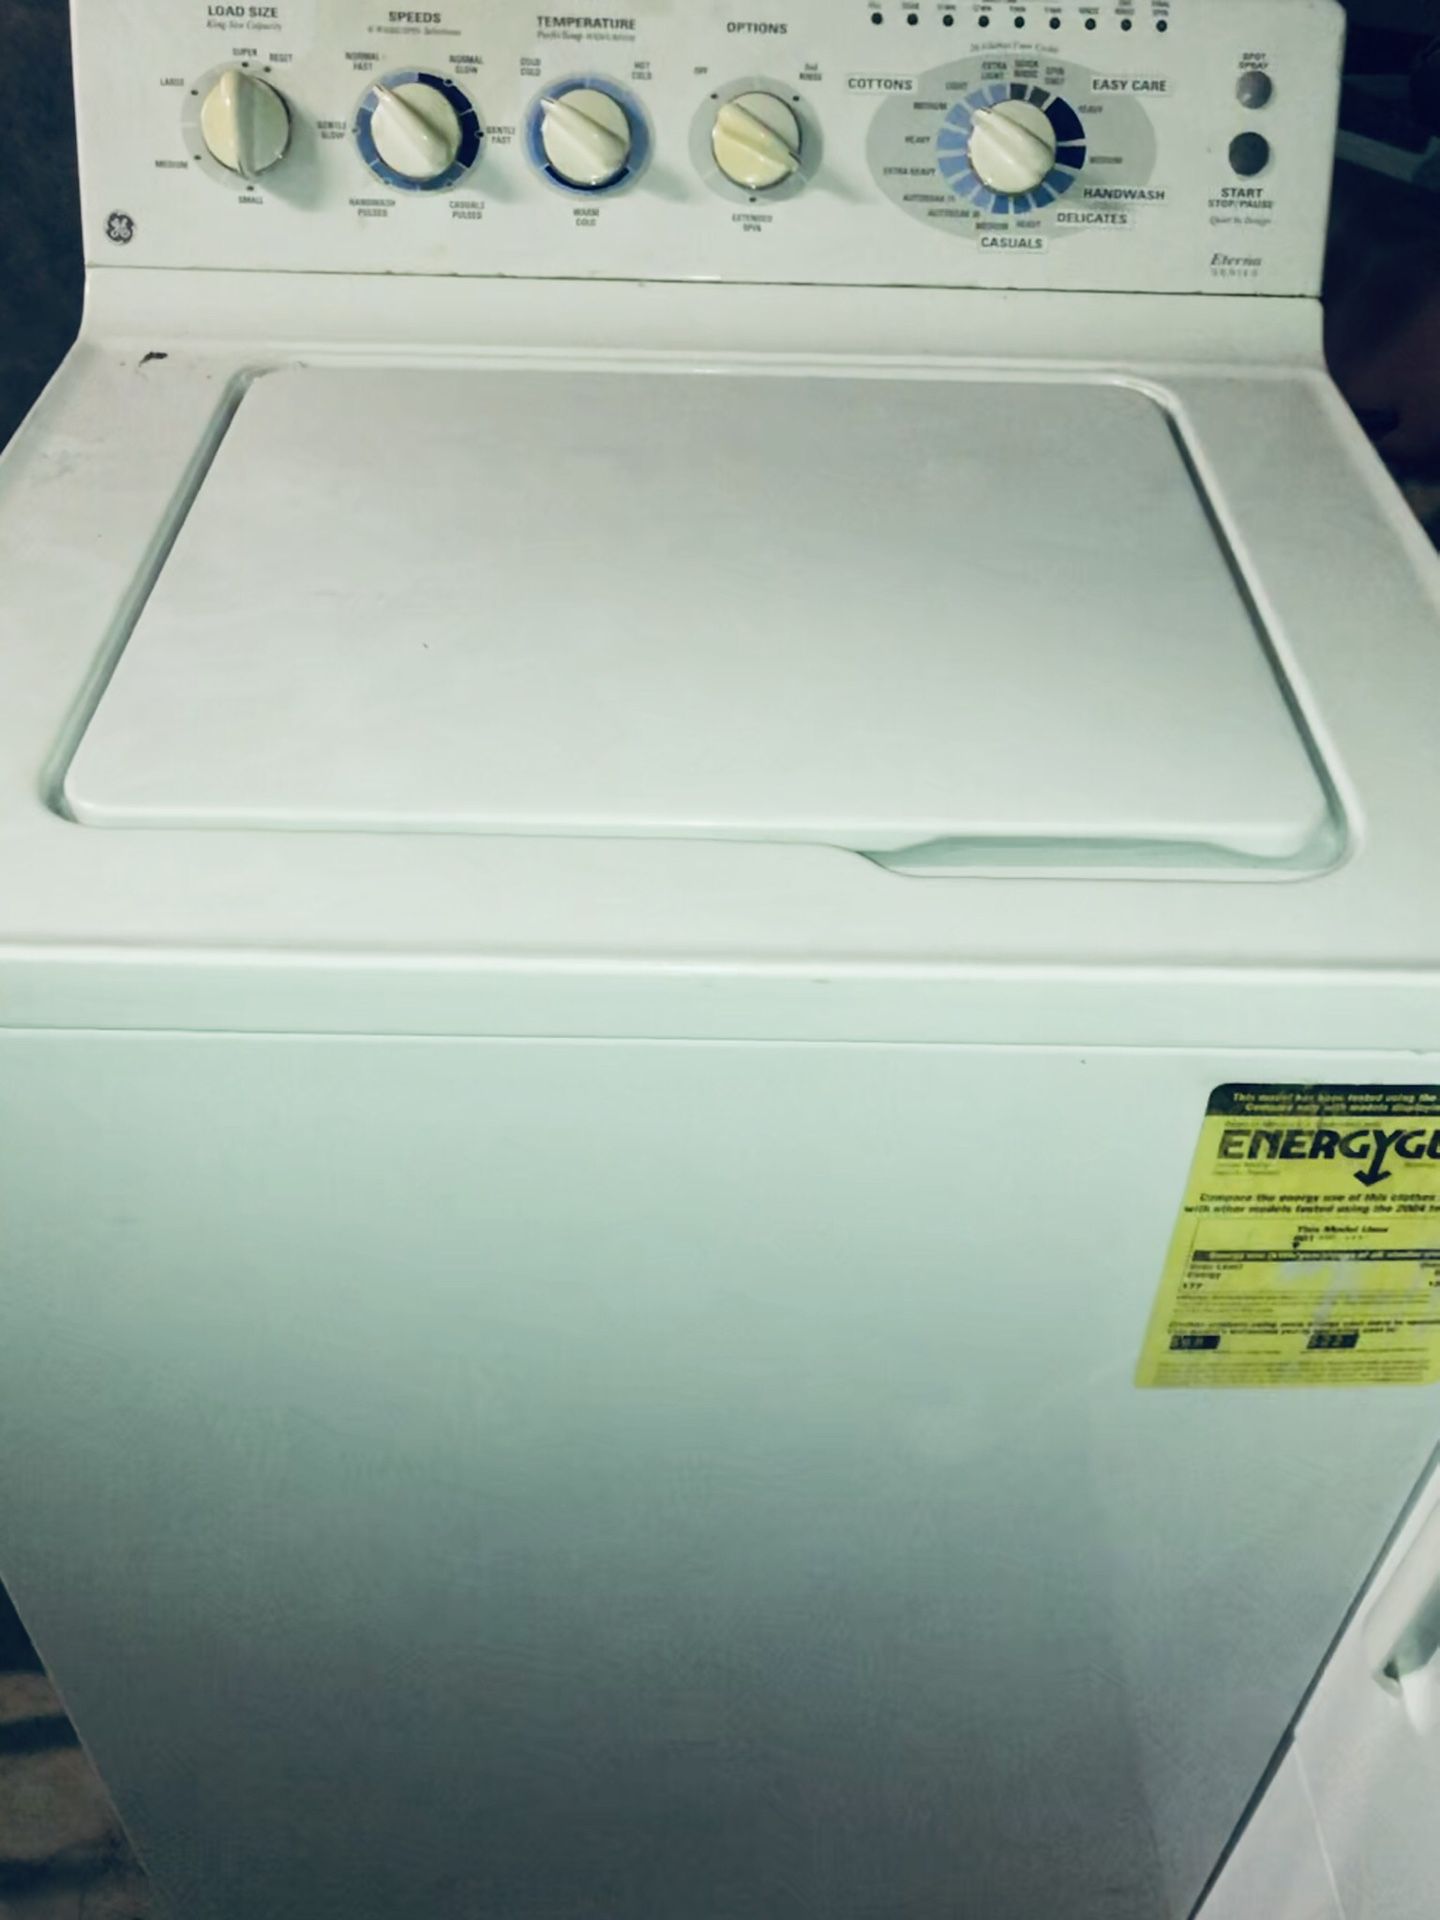 GE washer and electrical dryer